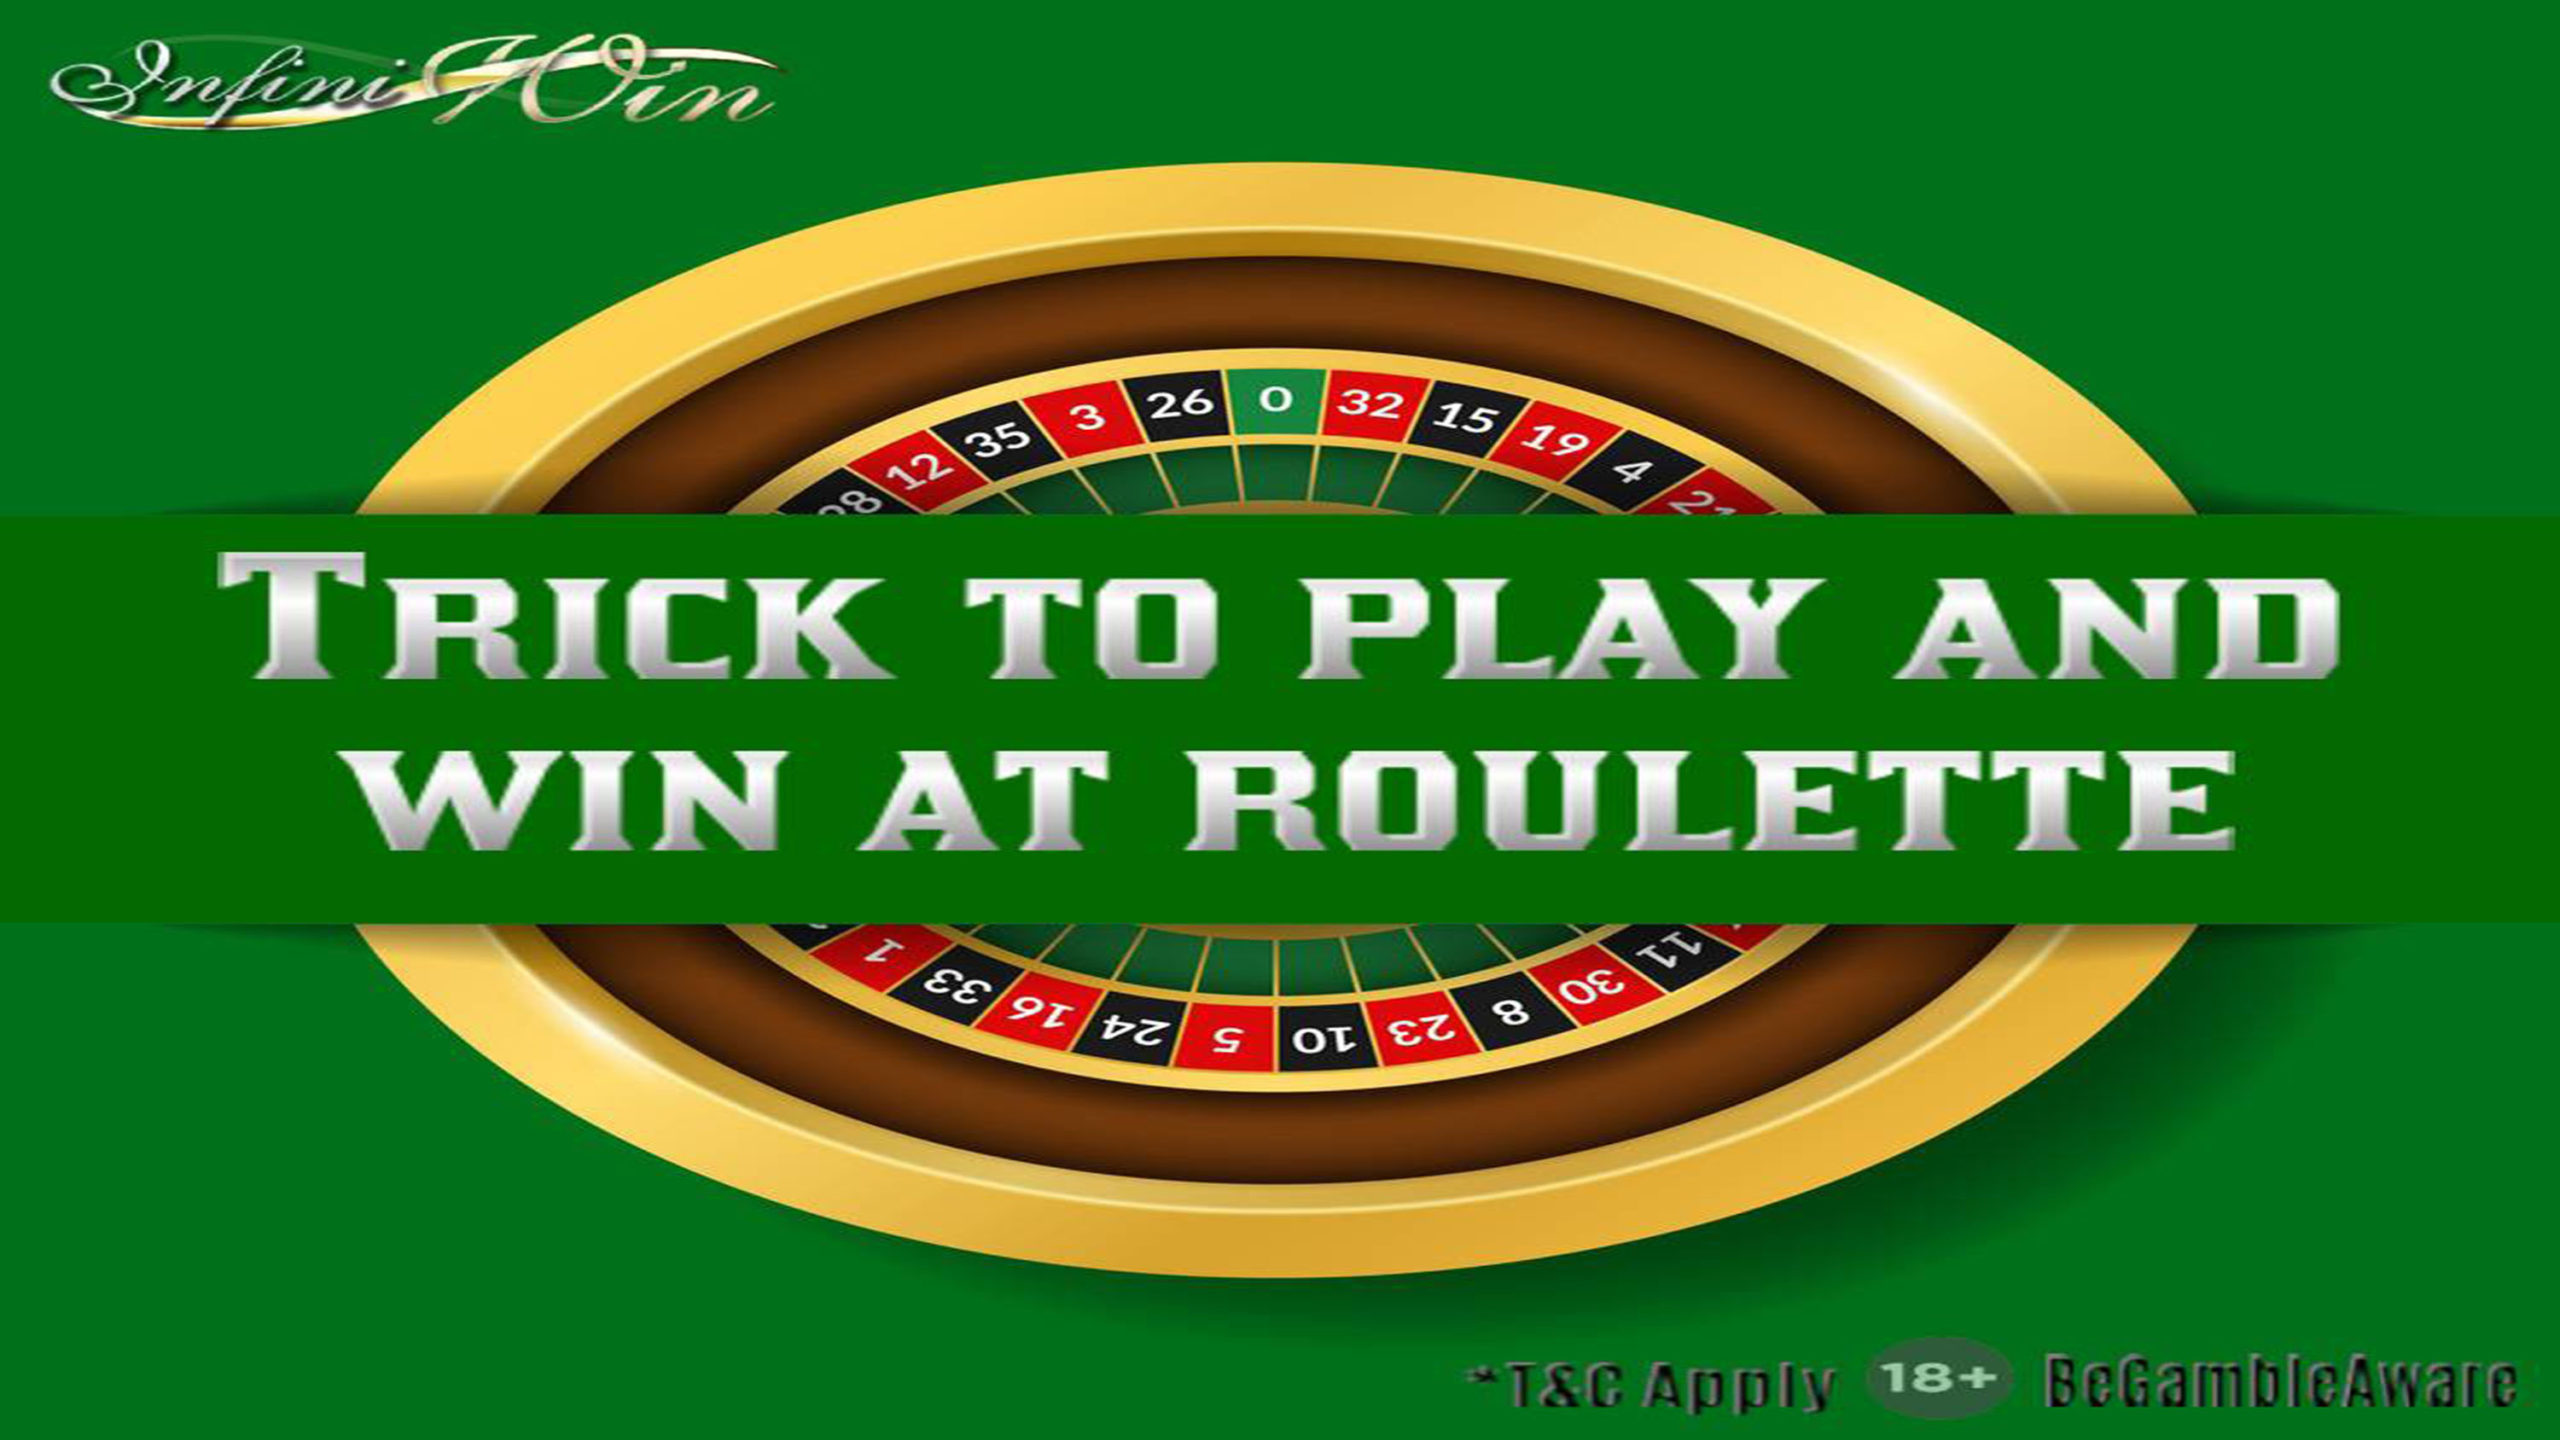 The trick to play and win at Roulette